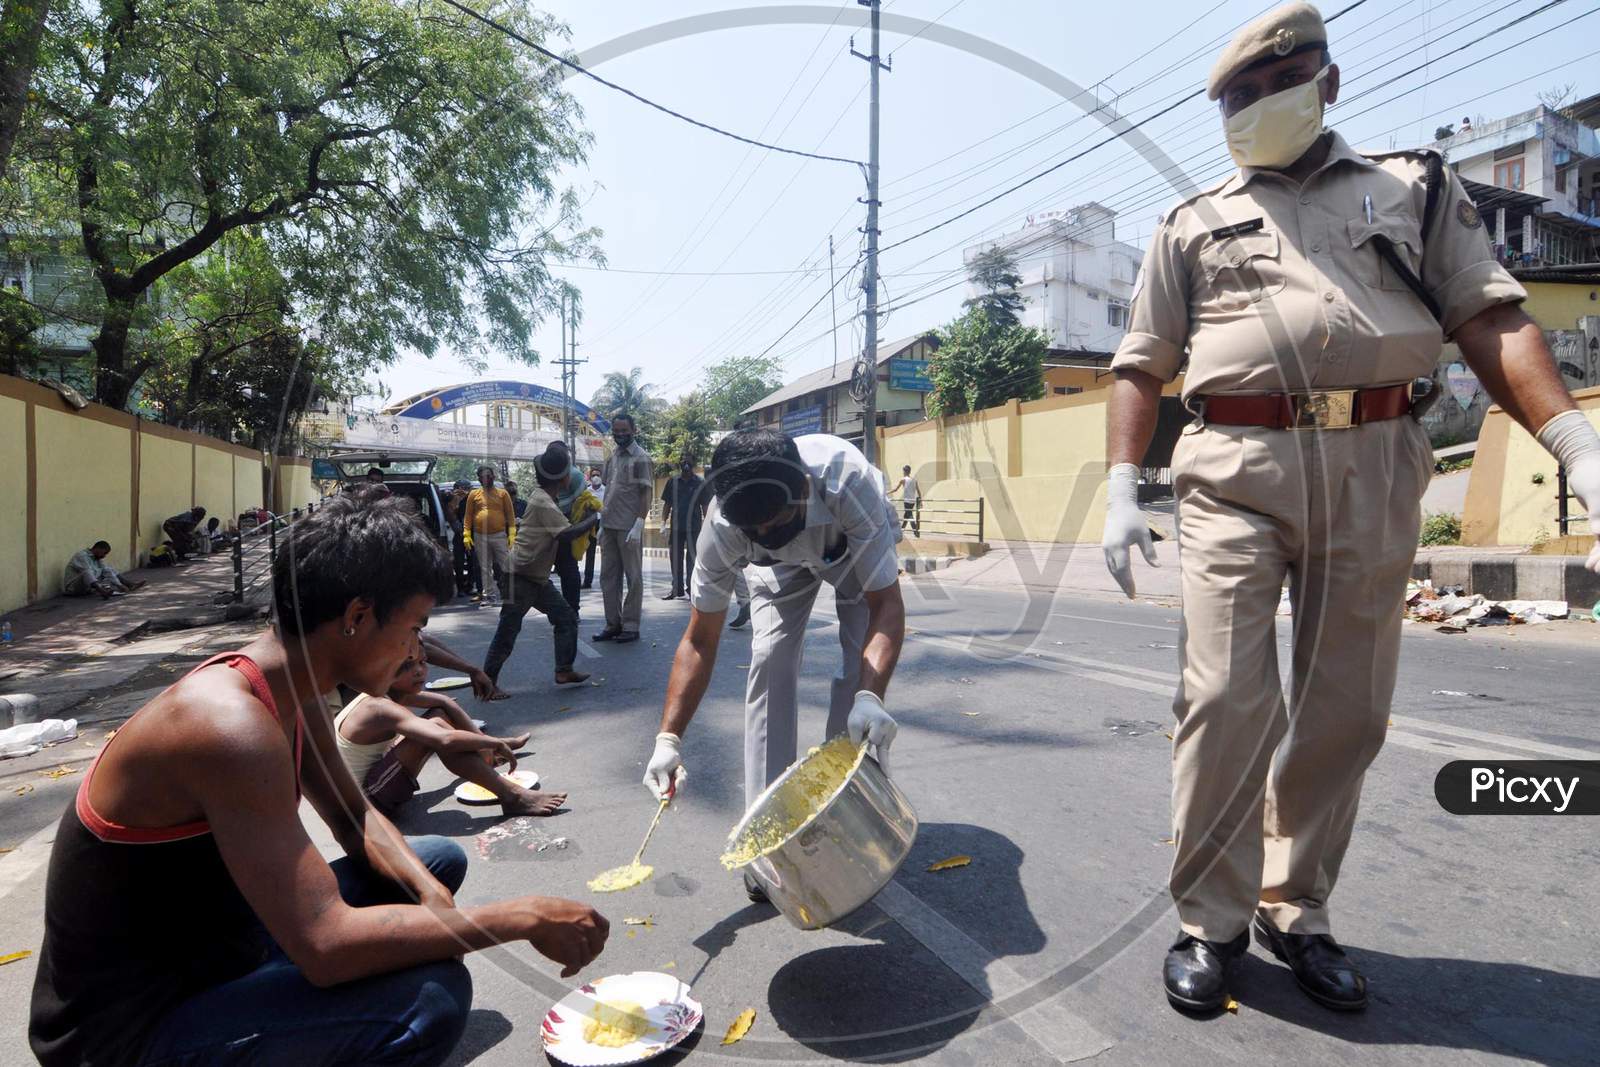 Assam Police Personnel Distributing Rice To The Poor During  The Nationwide Lockdown To Curb The Spread Of Coronavirus, In Guwahati, Sunday, April 5, 2020.